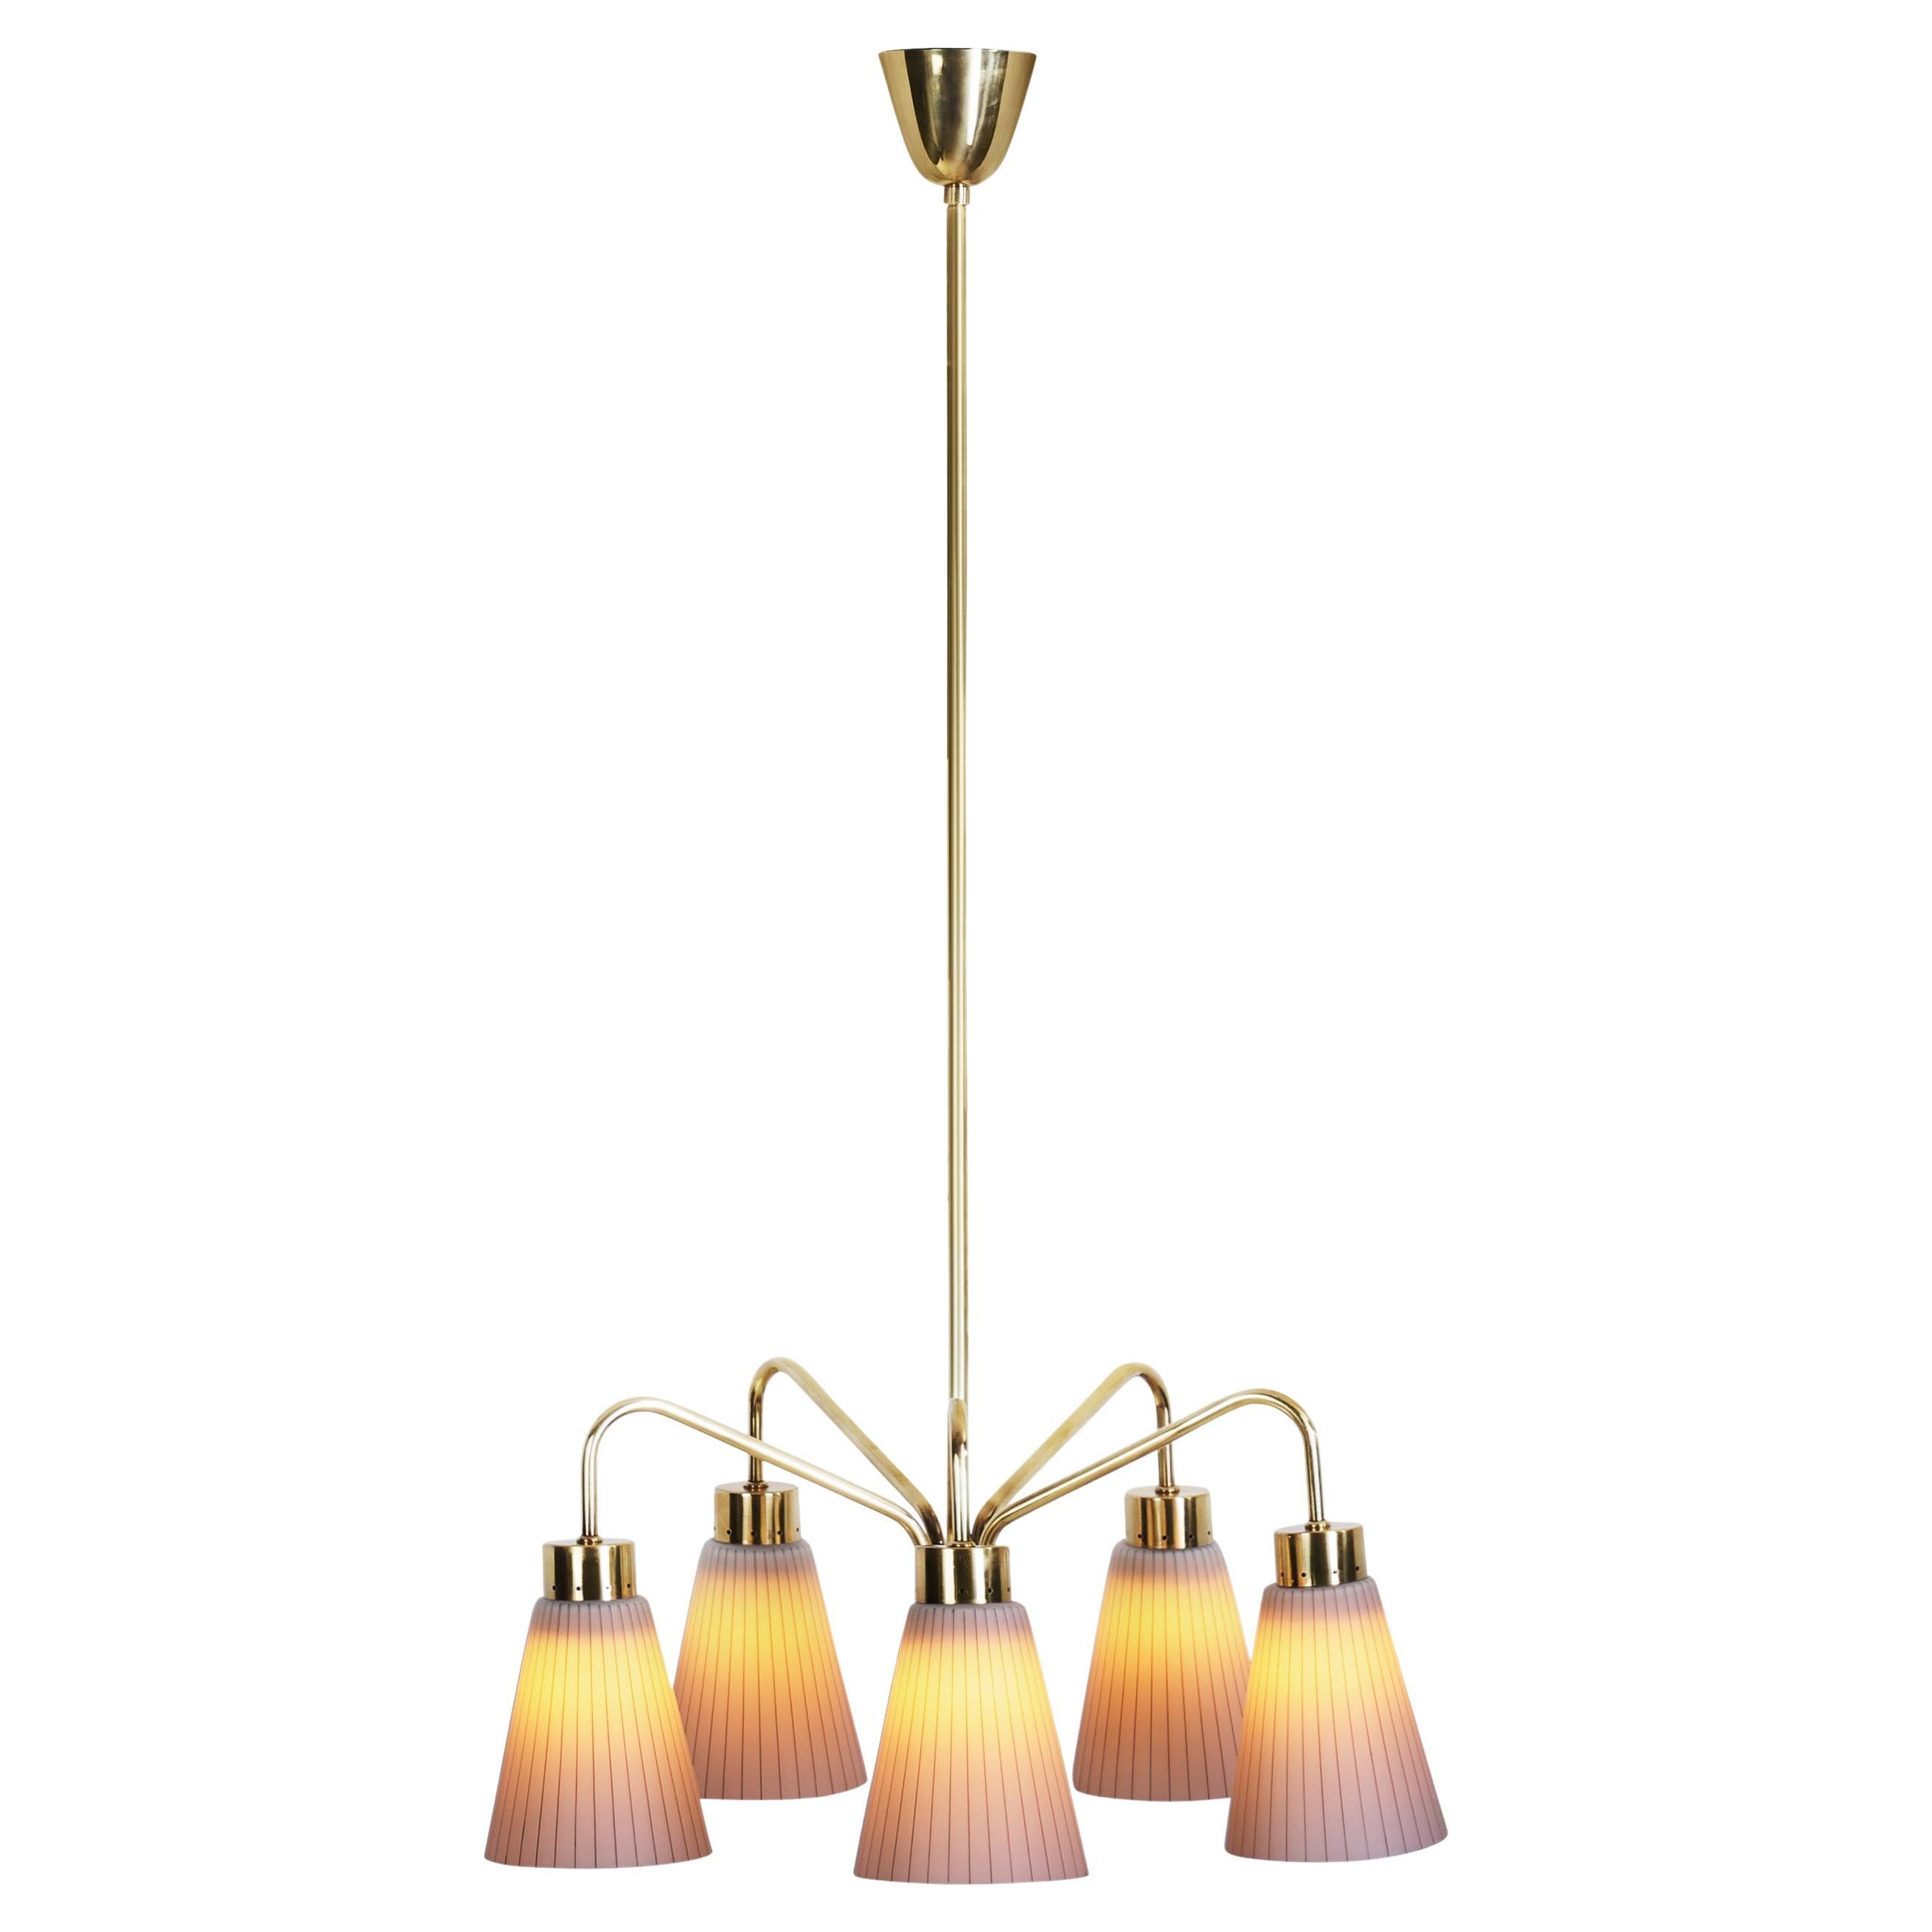 Mid-Century Modern Brass Ceiling Lamp with Striped Glass Shades, Europe ca 1950s